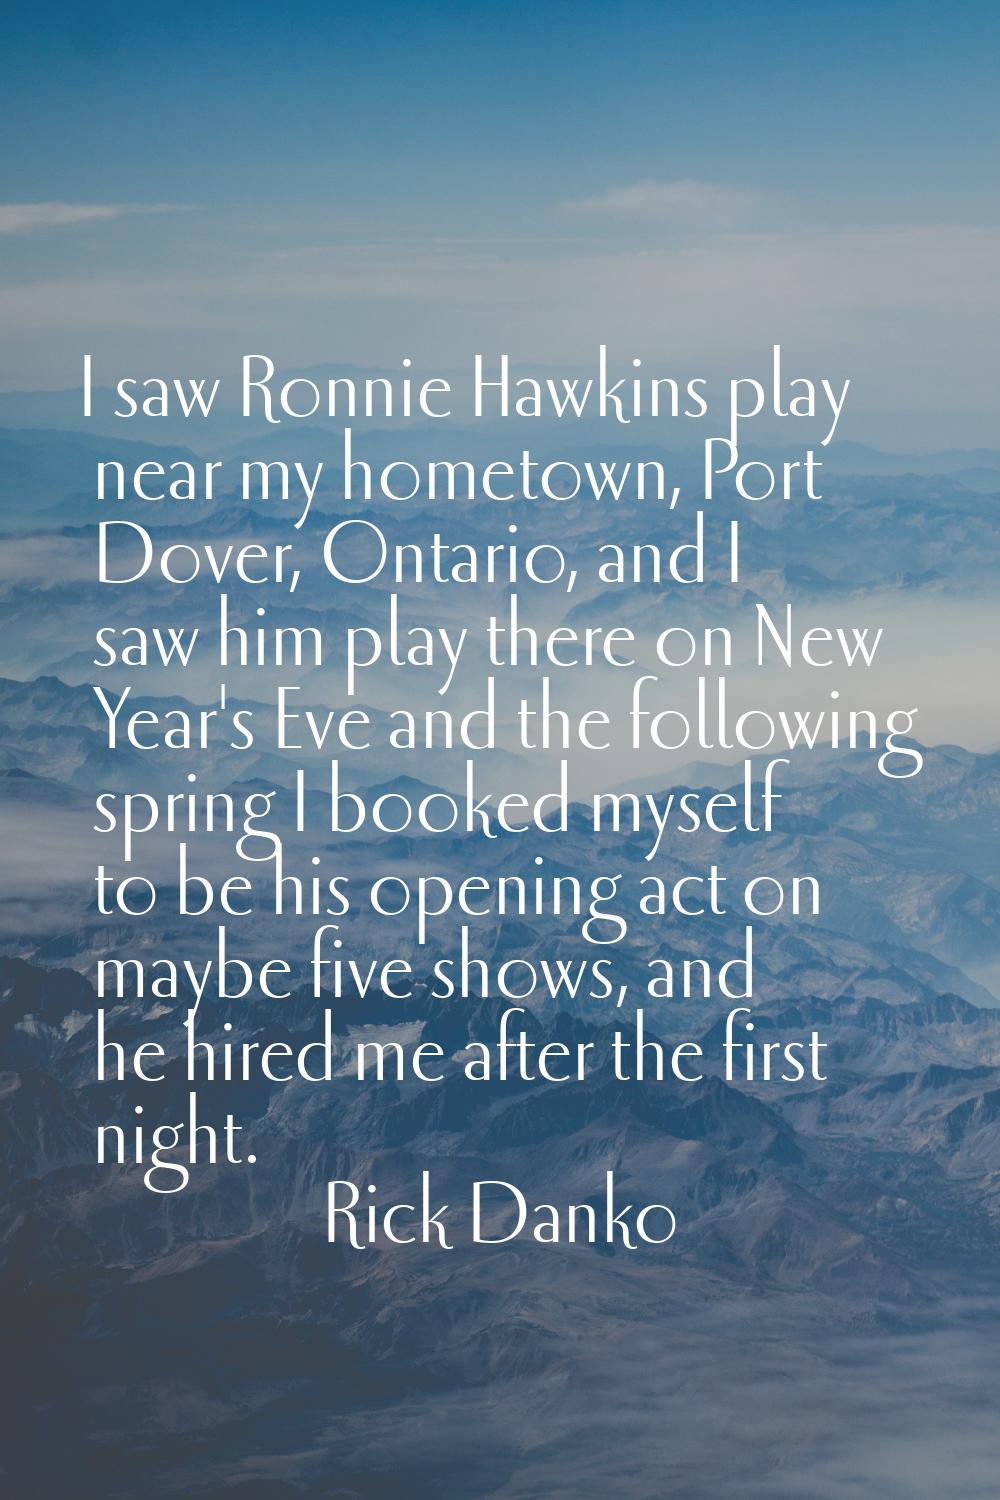 I saw Ronnie Hawkins play near my hometown, Port Dover, Ontario, and I saw him play there on New Ye